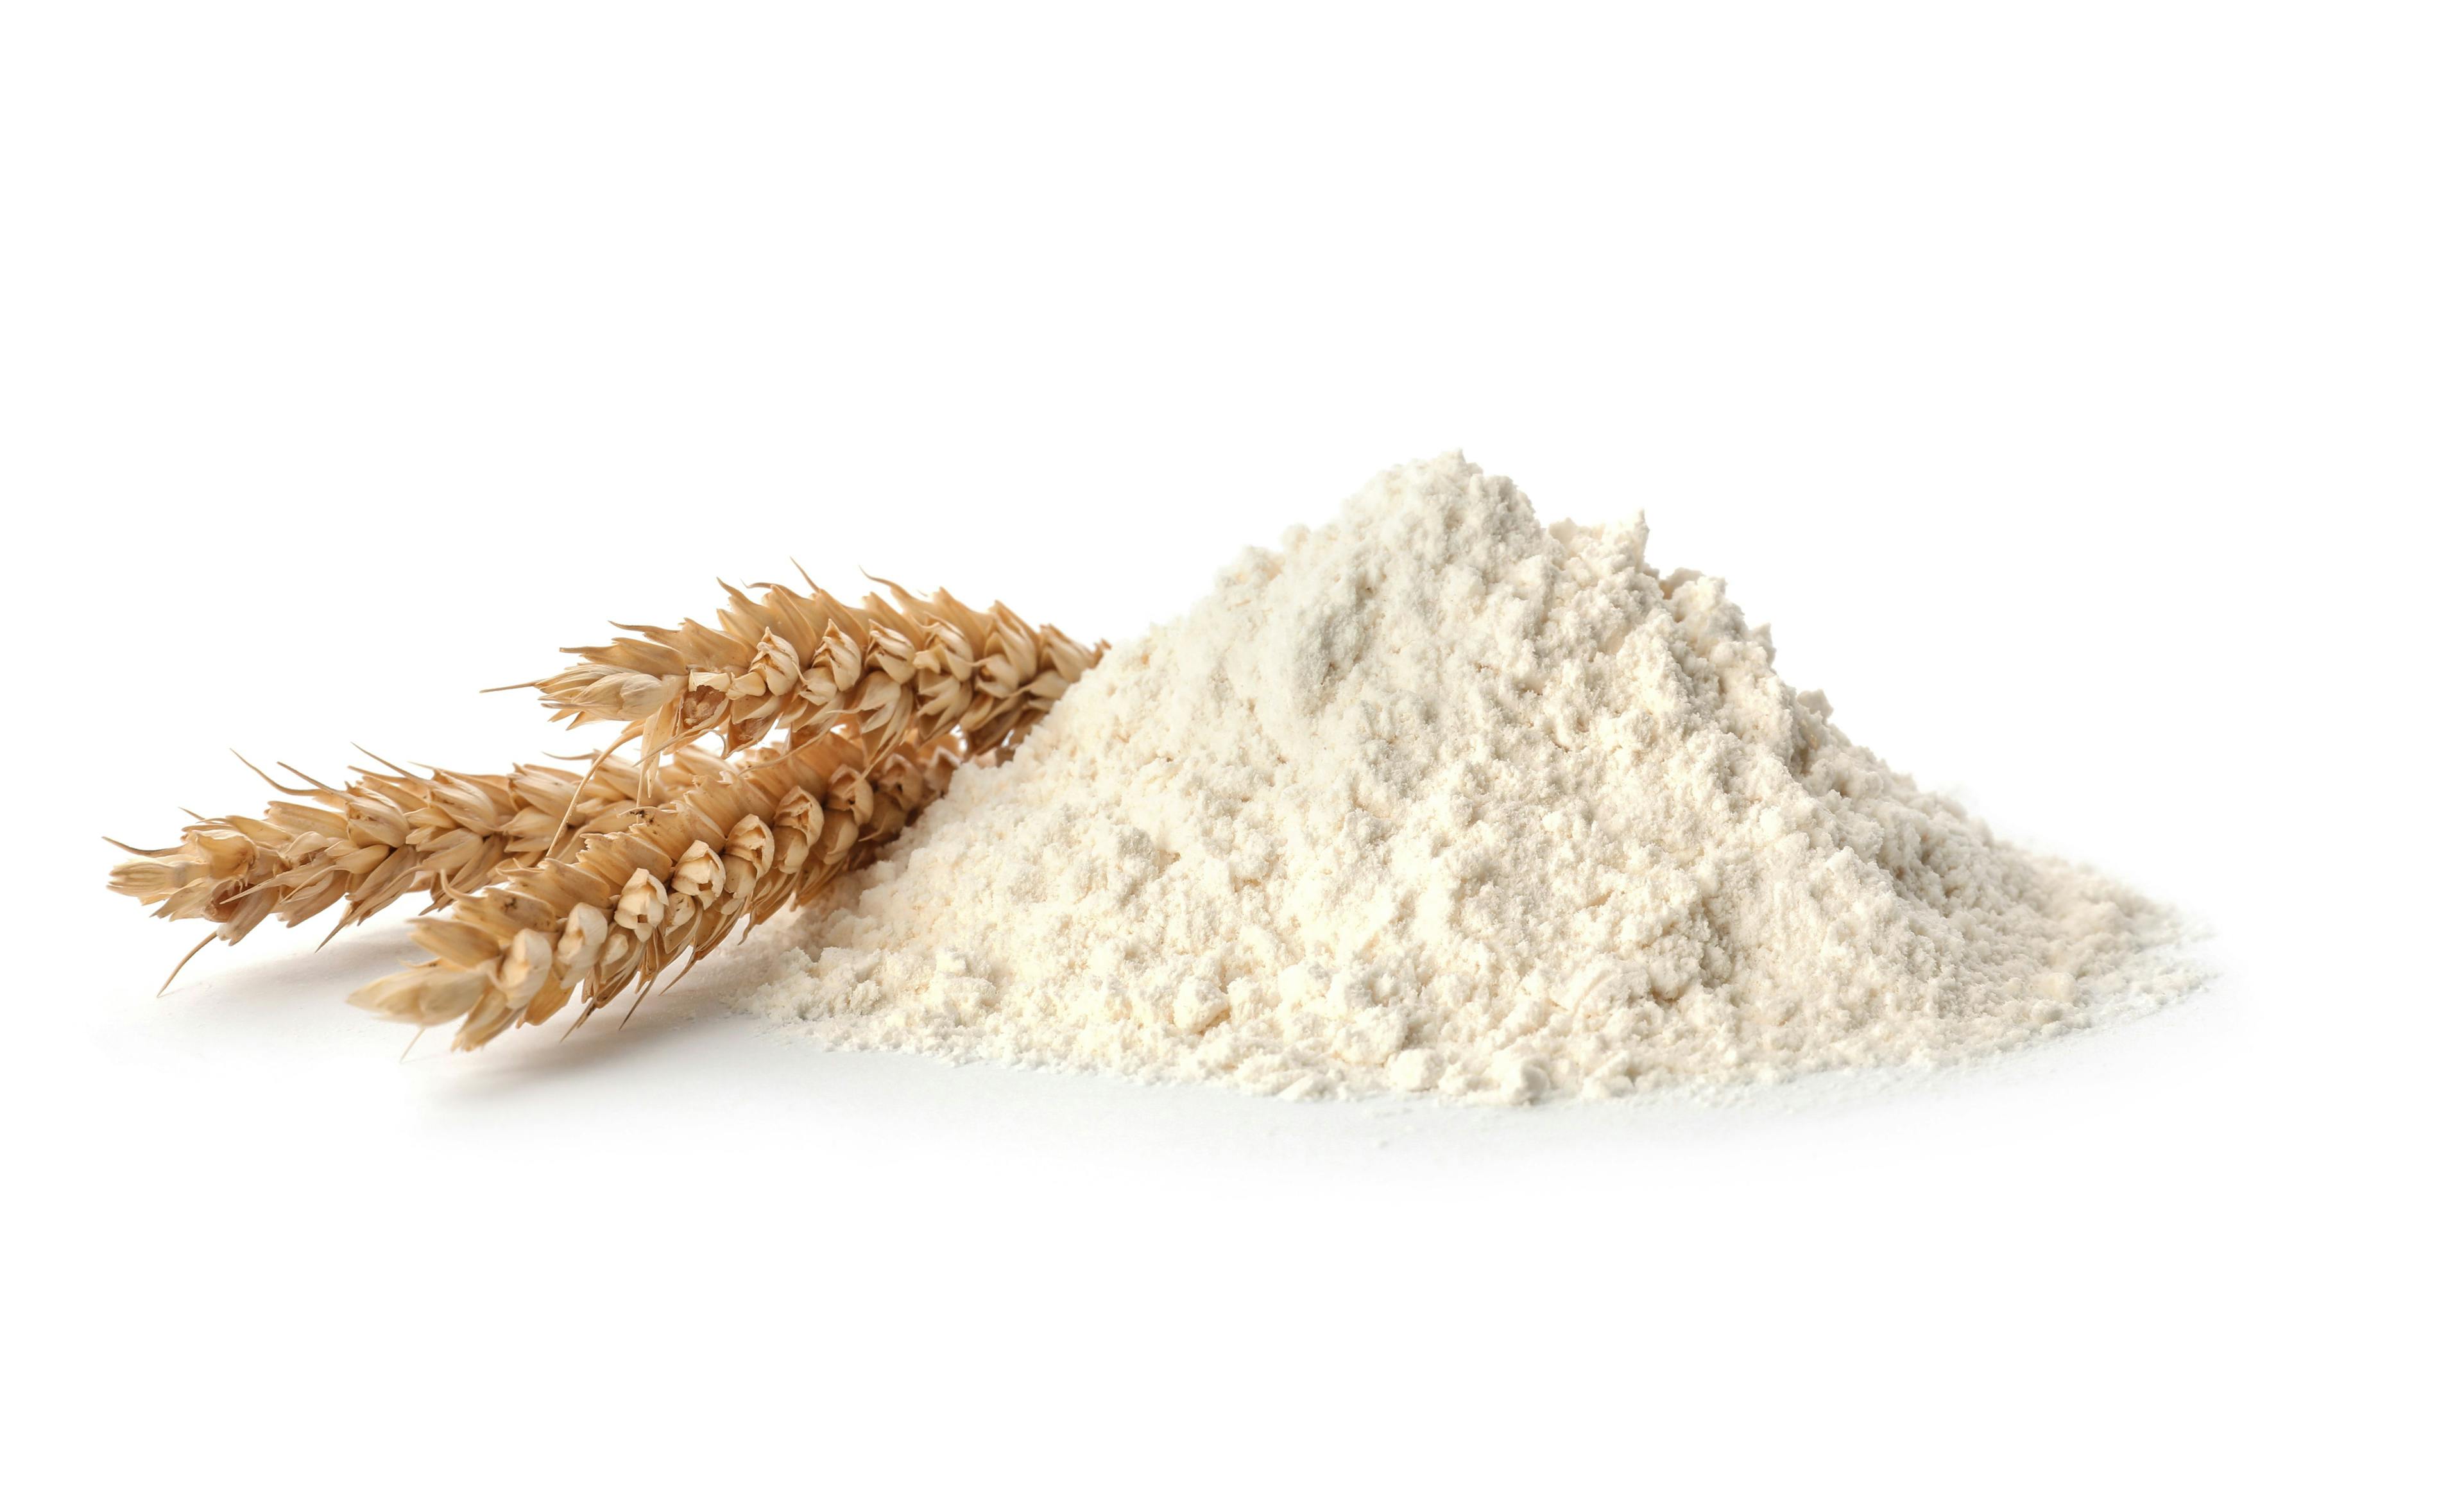 Fresh flour and ears of wheat isolated on white | Image Credit: © New Africa - stock.adobe.com